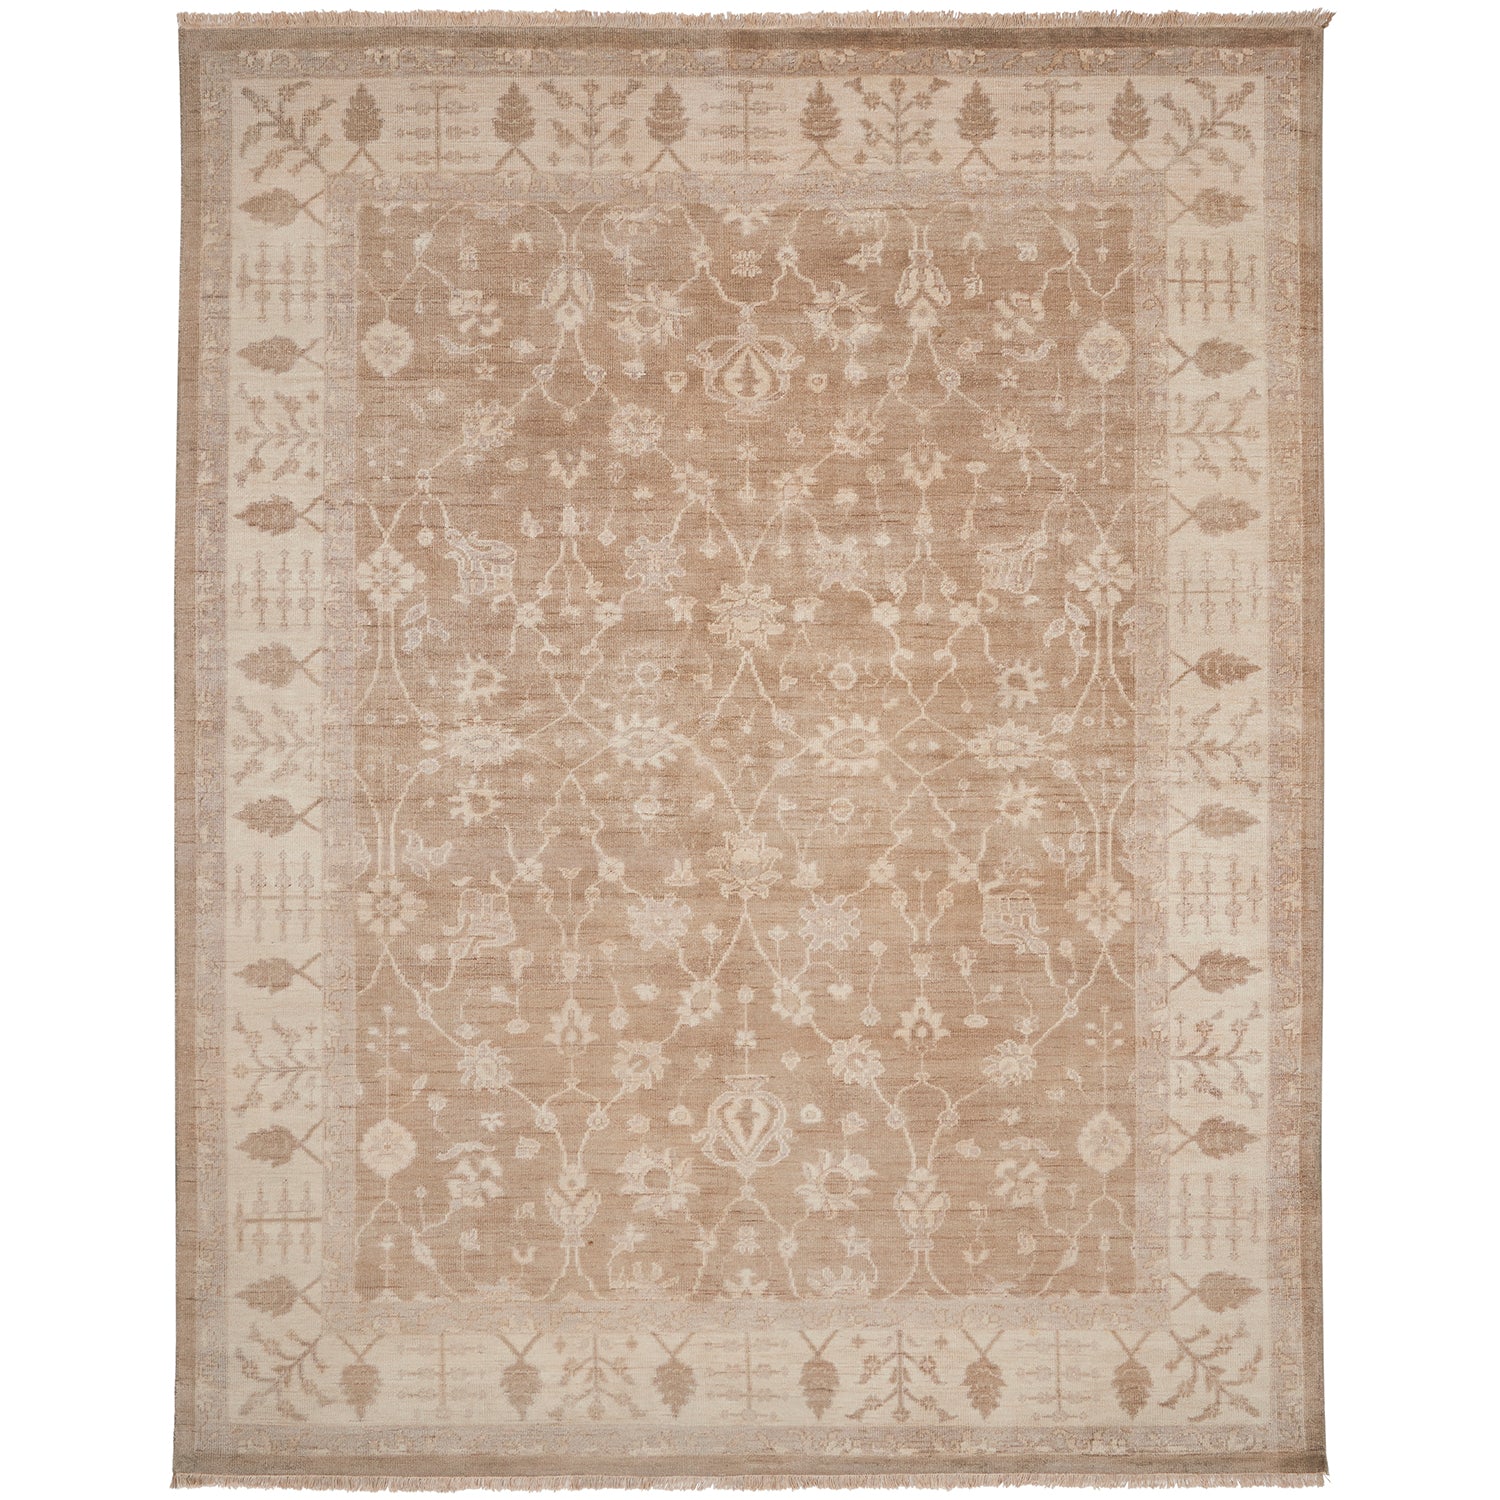 Symmetric patterned rug with muted beige tones and floral motifs.